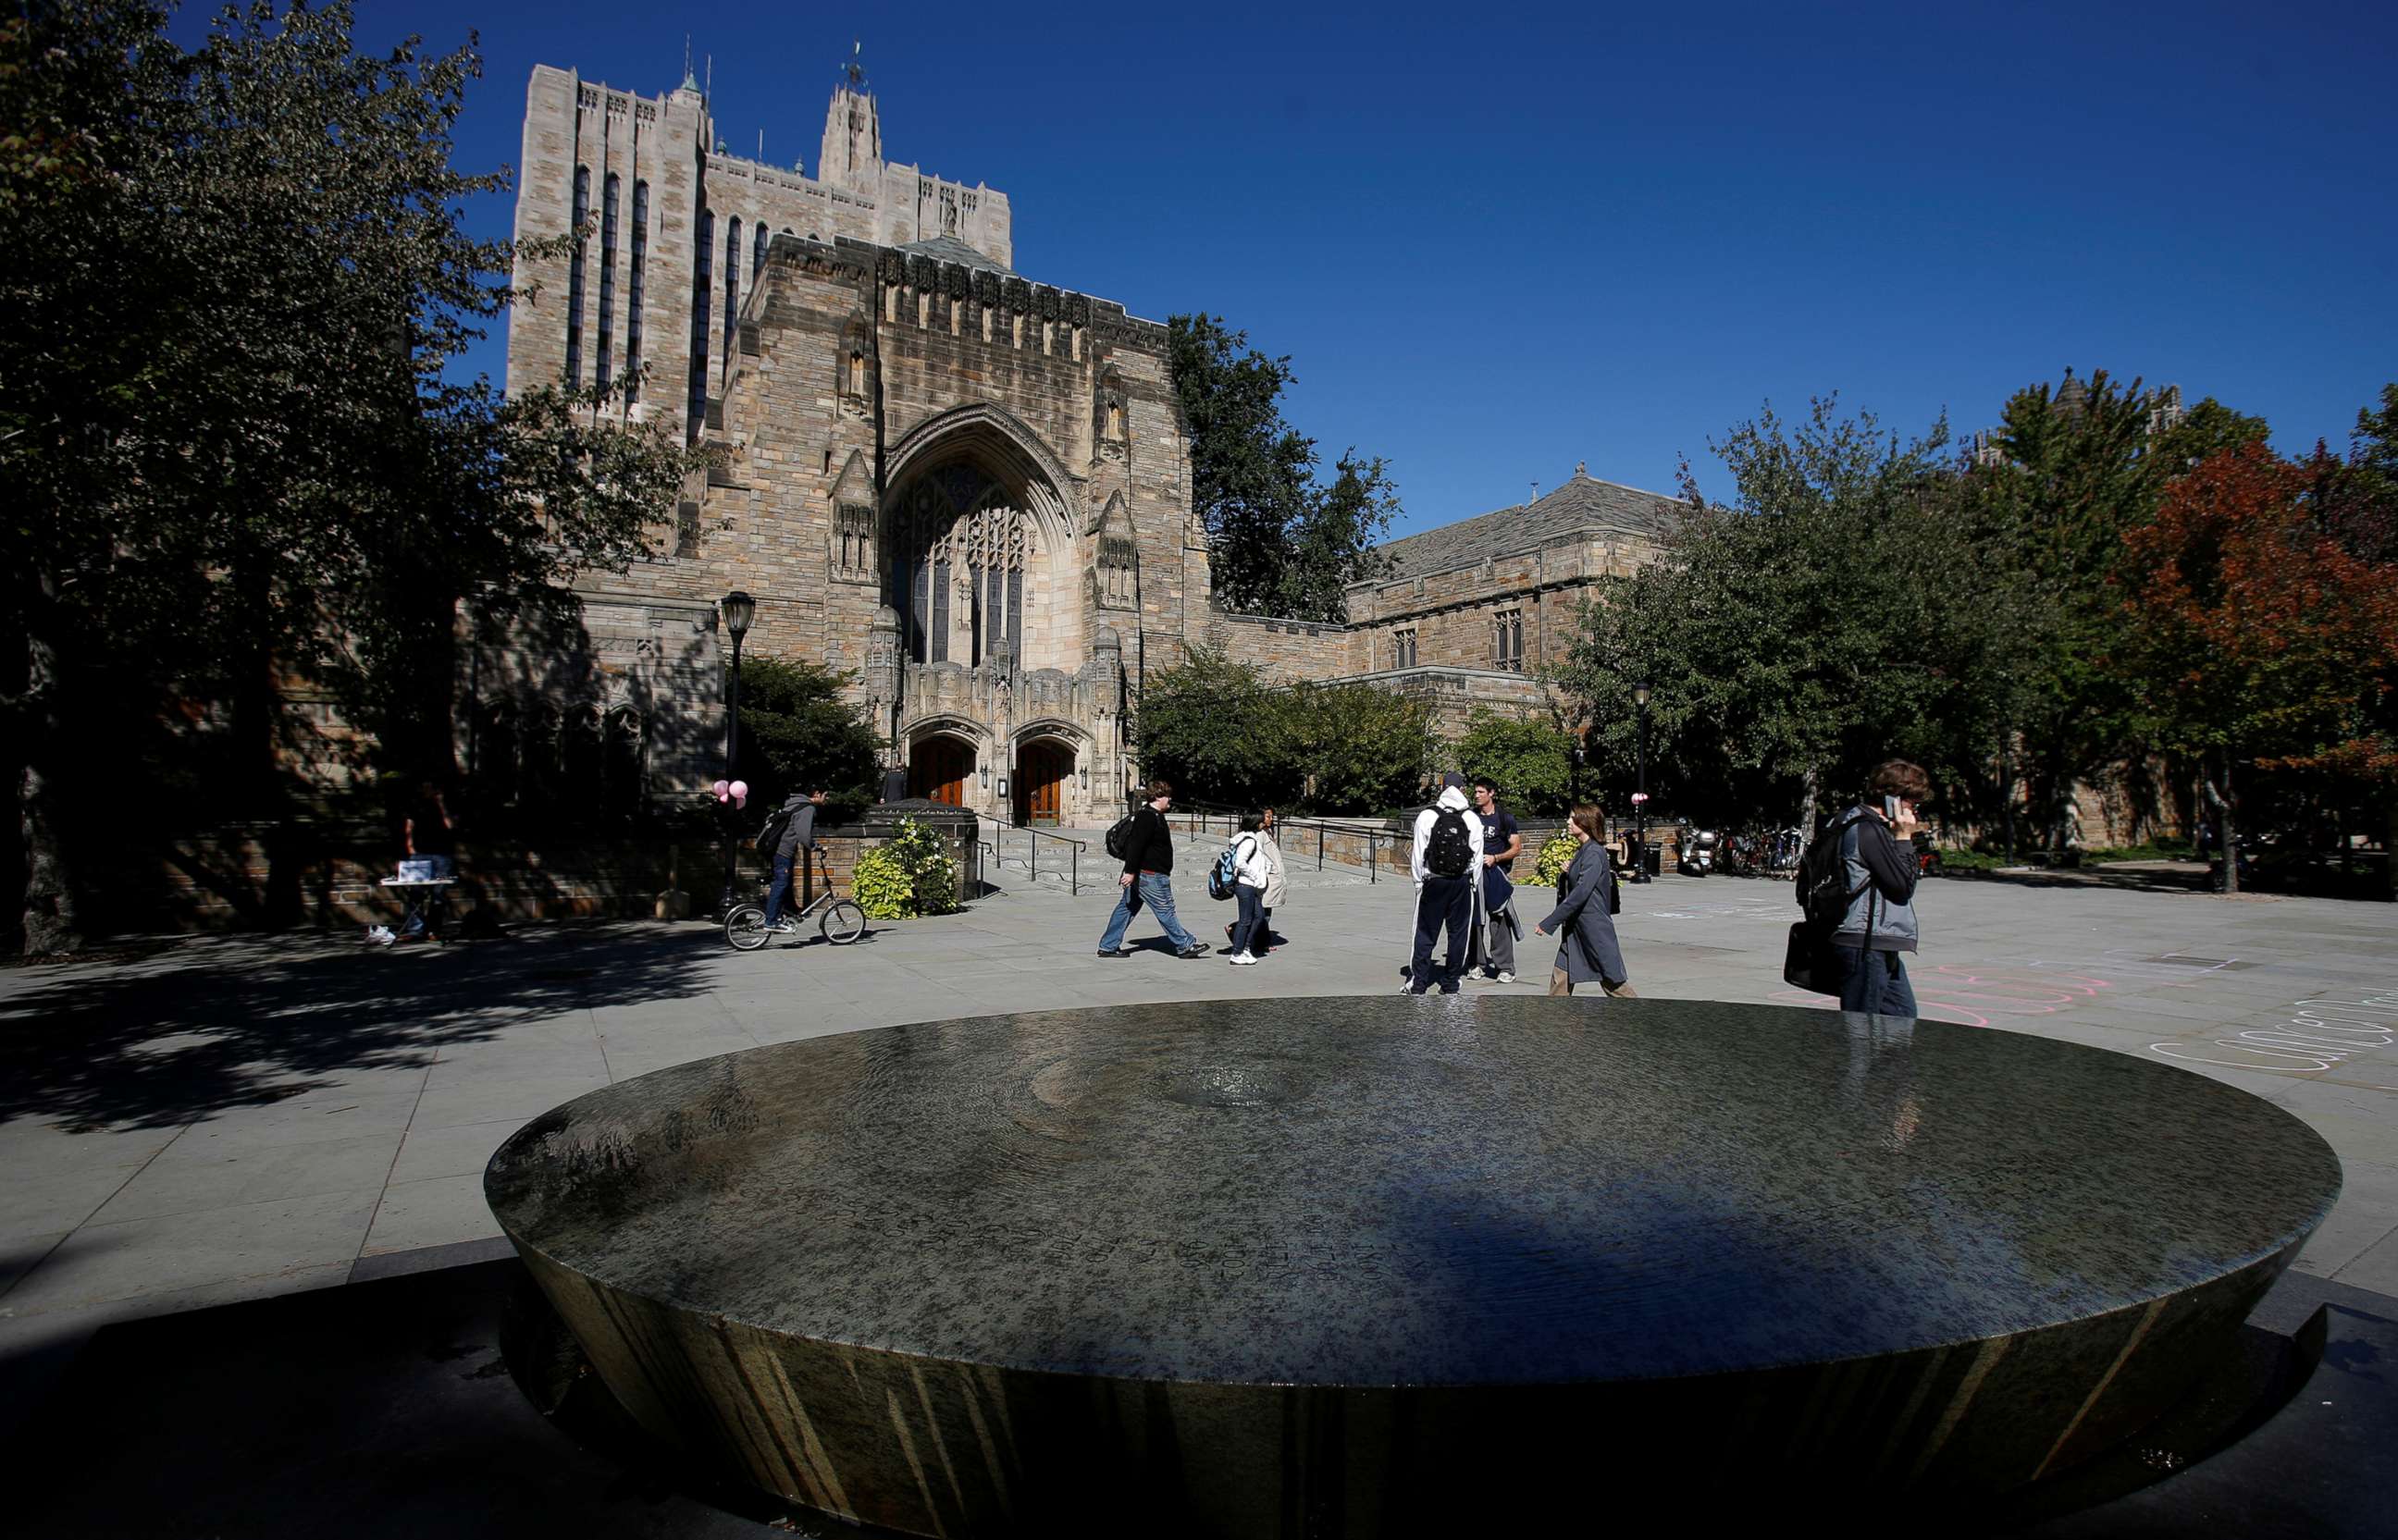 PHOTO: Students walk on the campus of Yale University in New Haven, Conn., Oct.7, 2009.